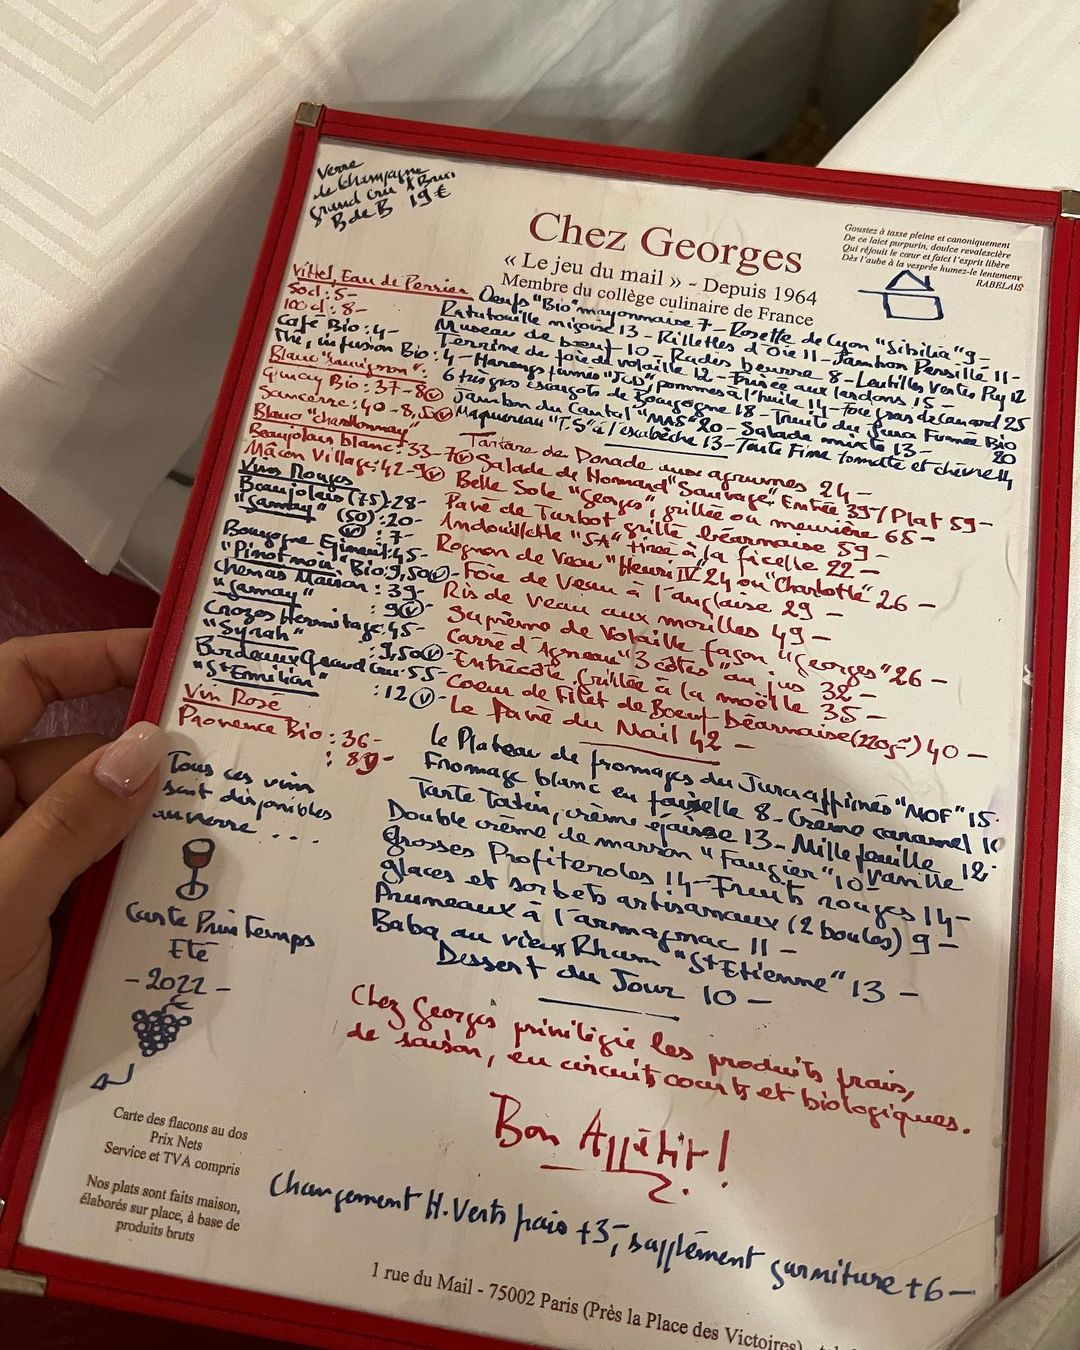 The completely hand-written original menu at Chez Georges